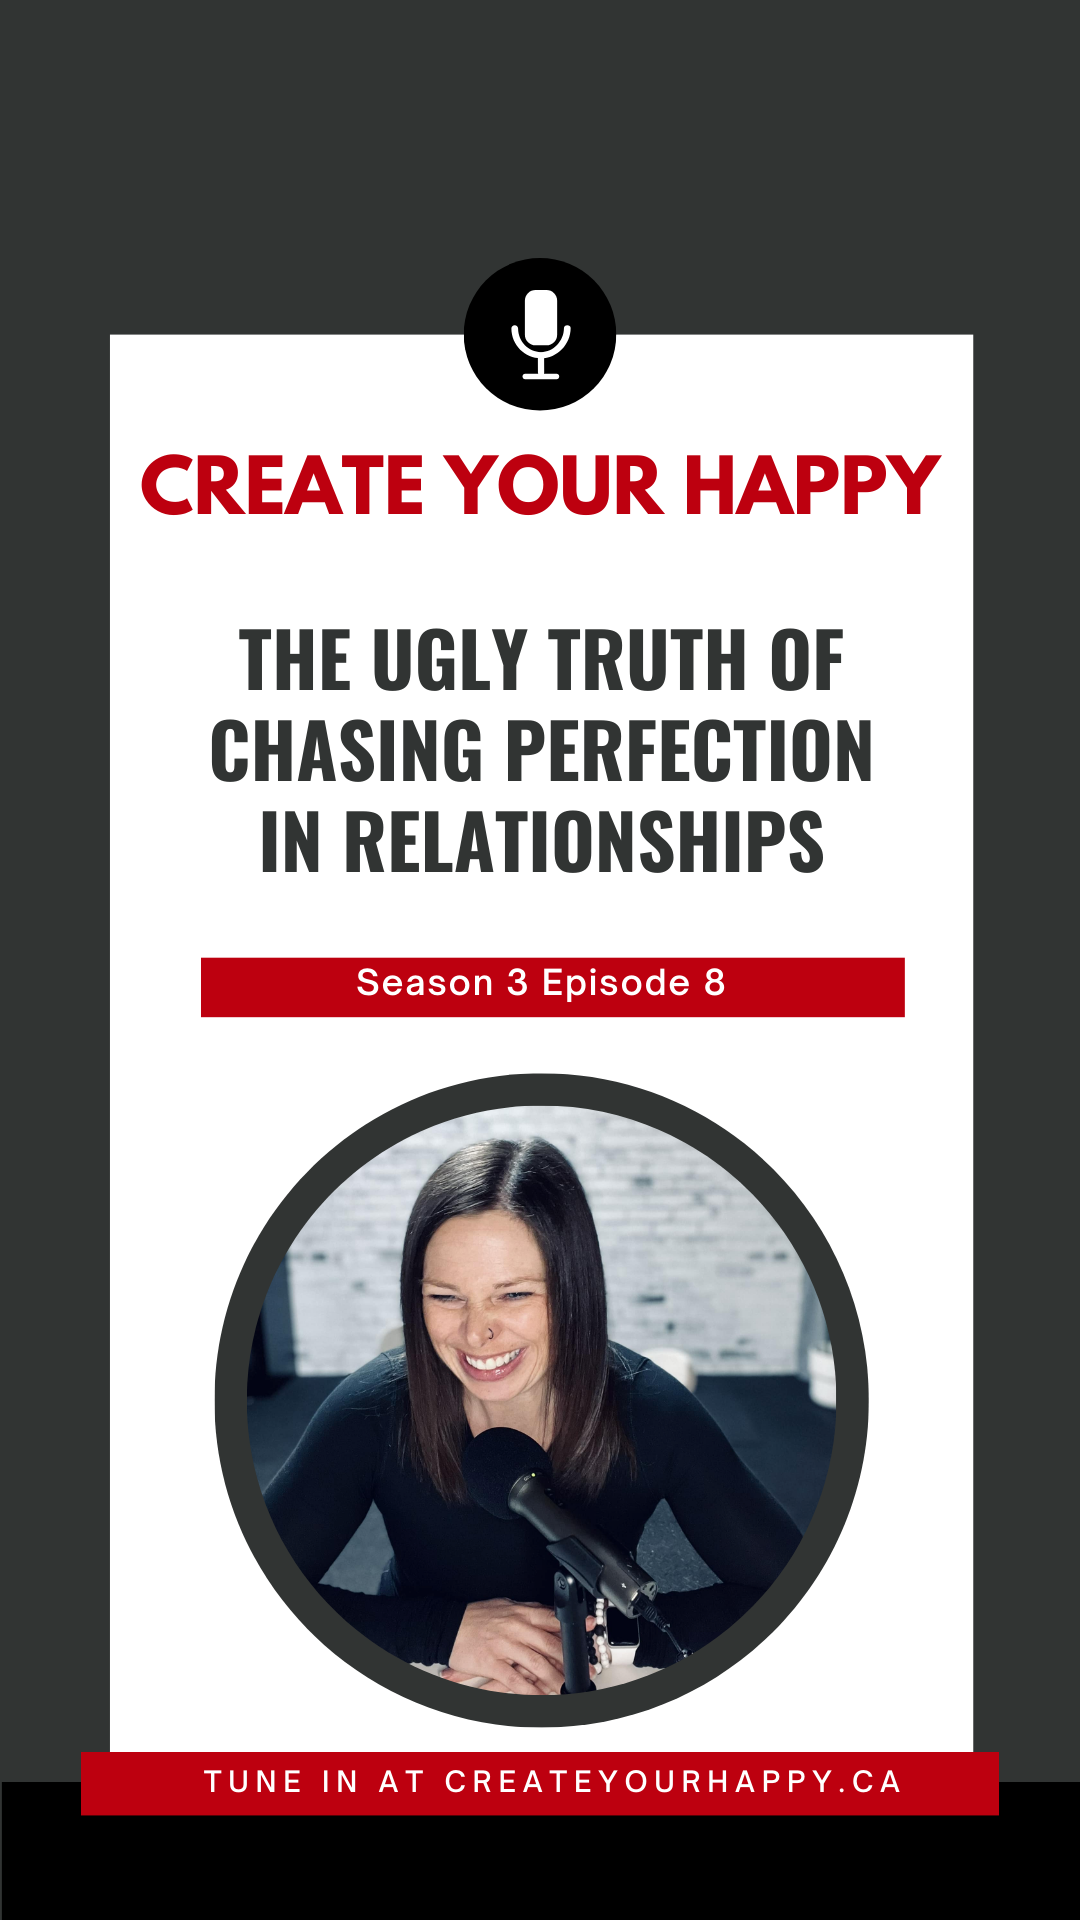 The UGLY Truth of Chasing Perfection in Relationships